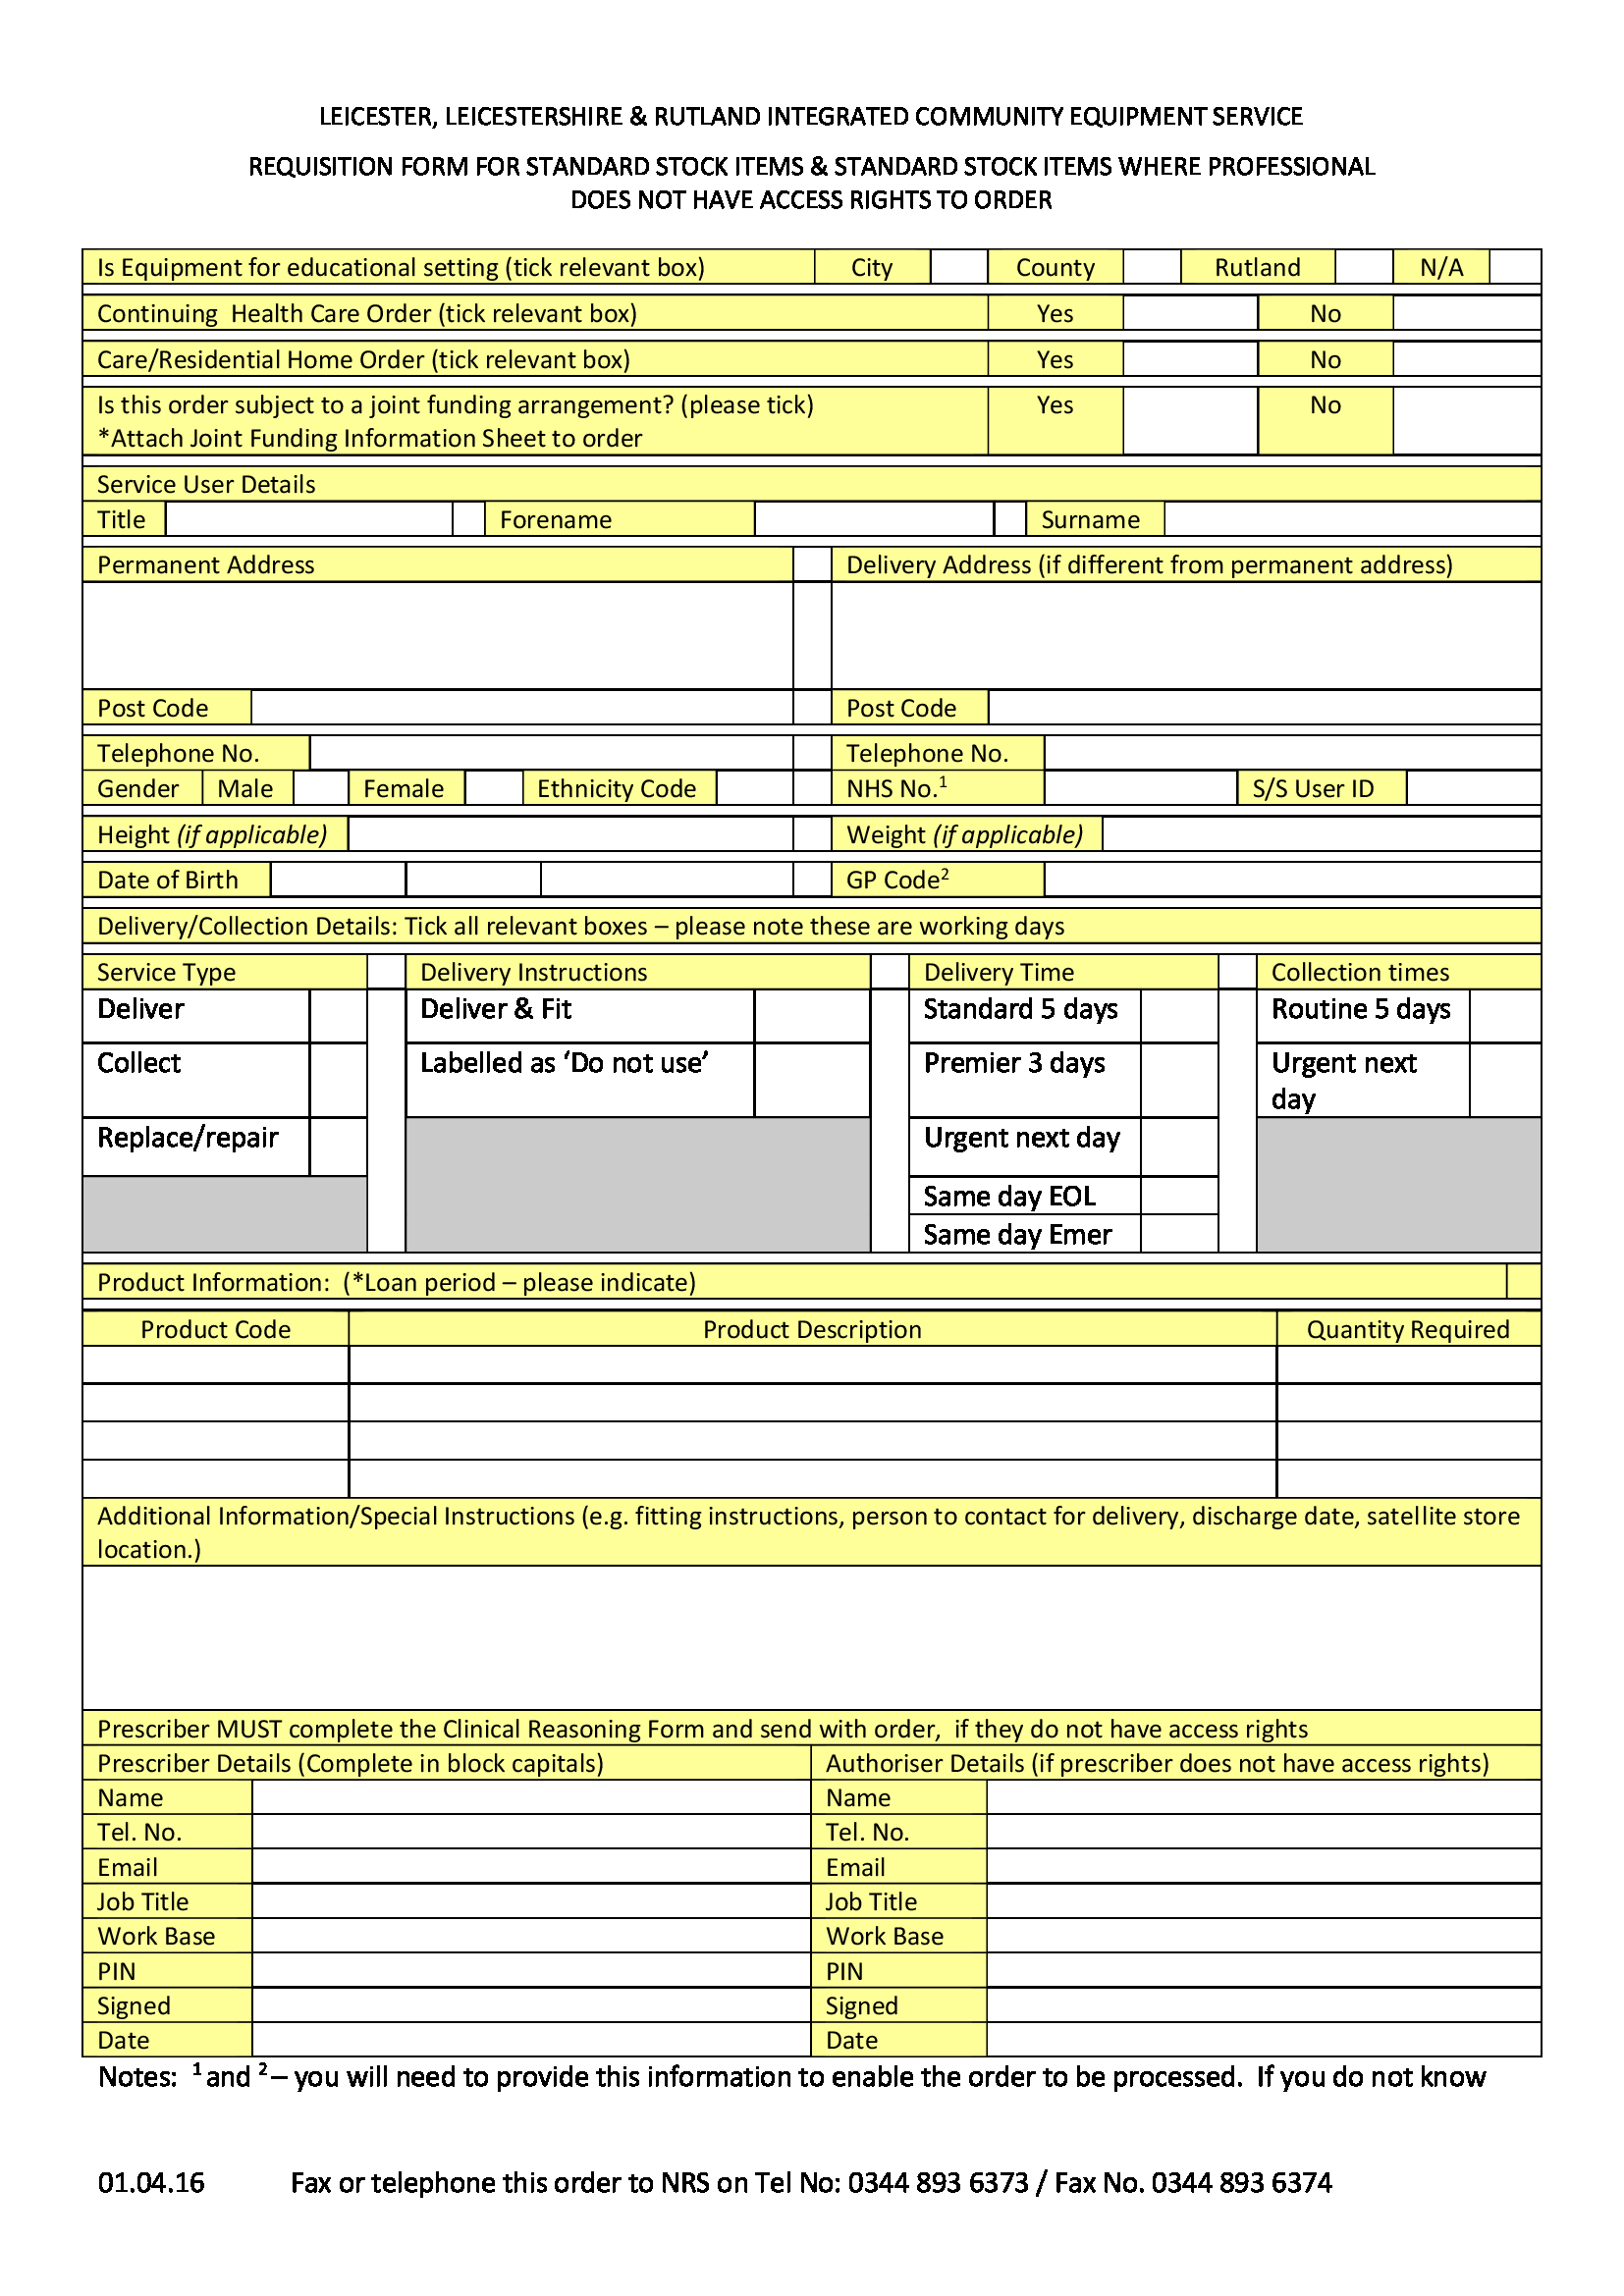 standard stock requisition form